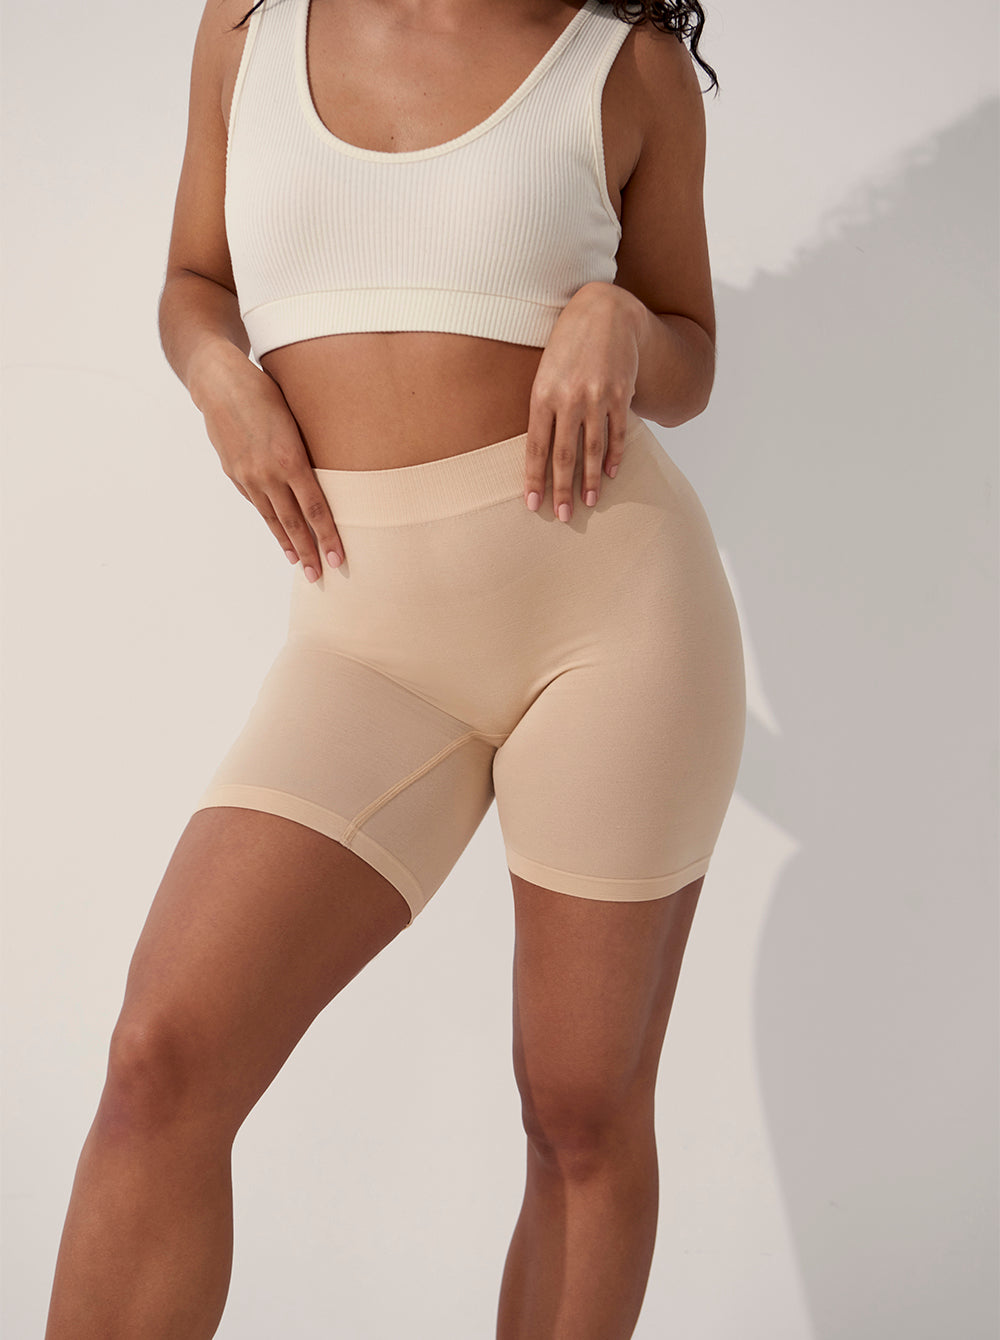 High Rise Anti-Chafing Panty Short by Thigh Society • THE PLUS-SIZE  BACKPACKER